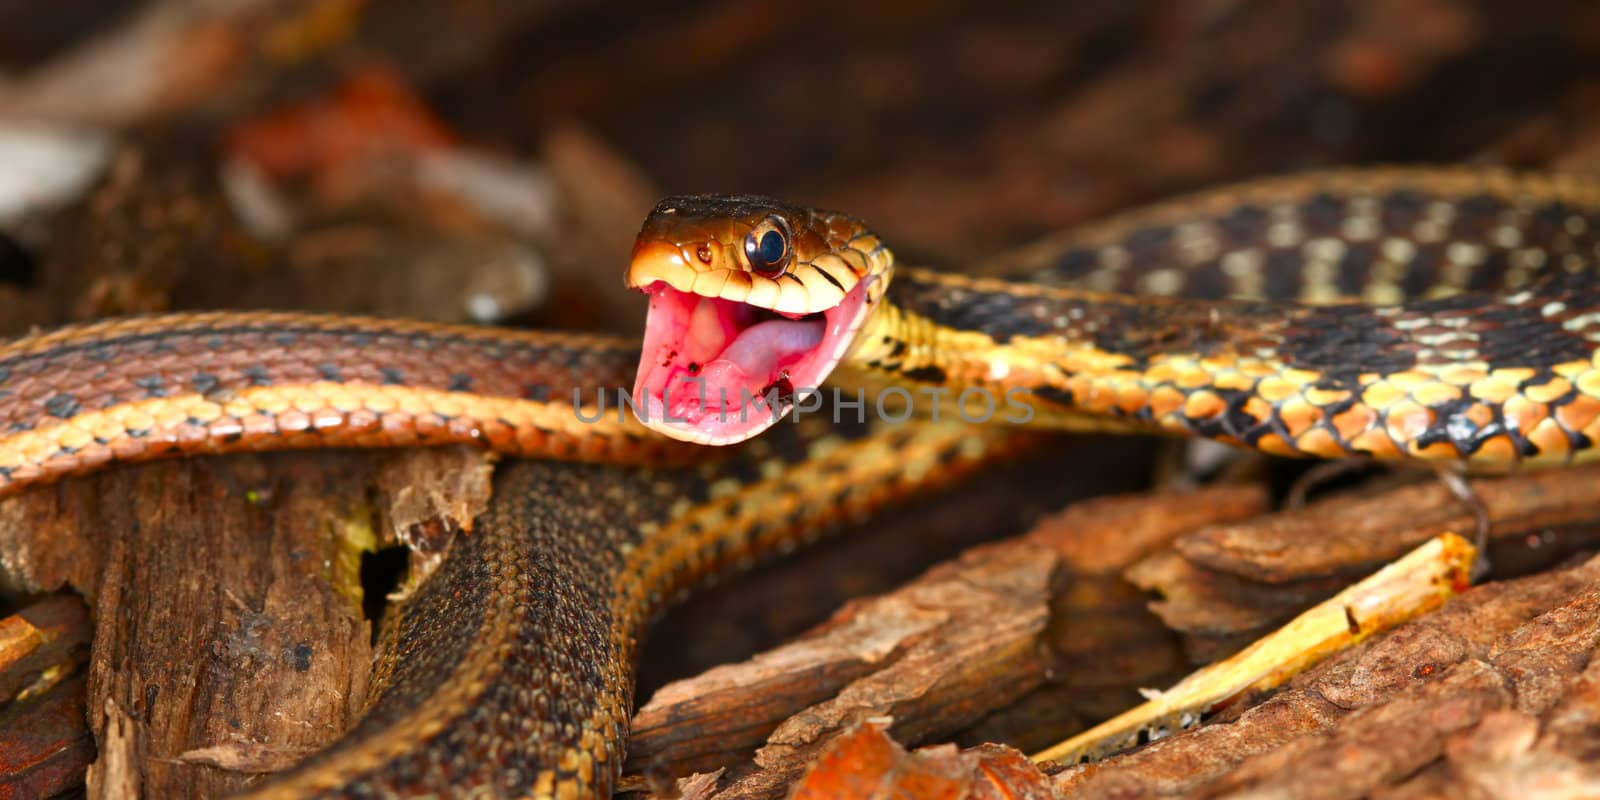 Garter Snake (Thamnophis sirtalis) takes a defensive position.